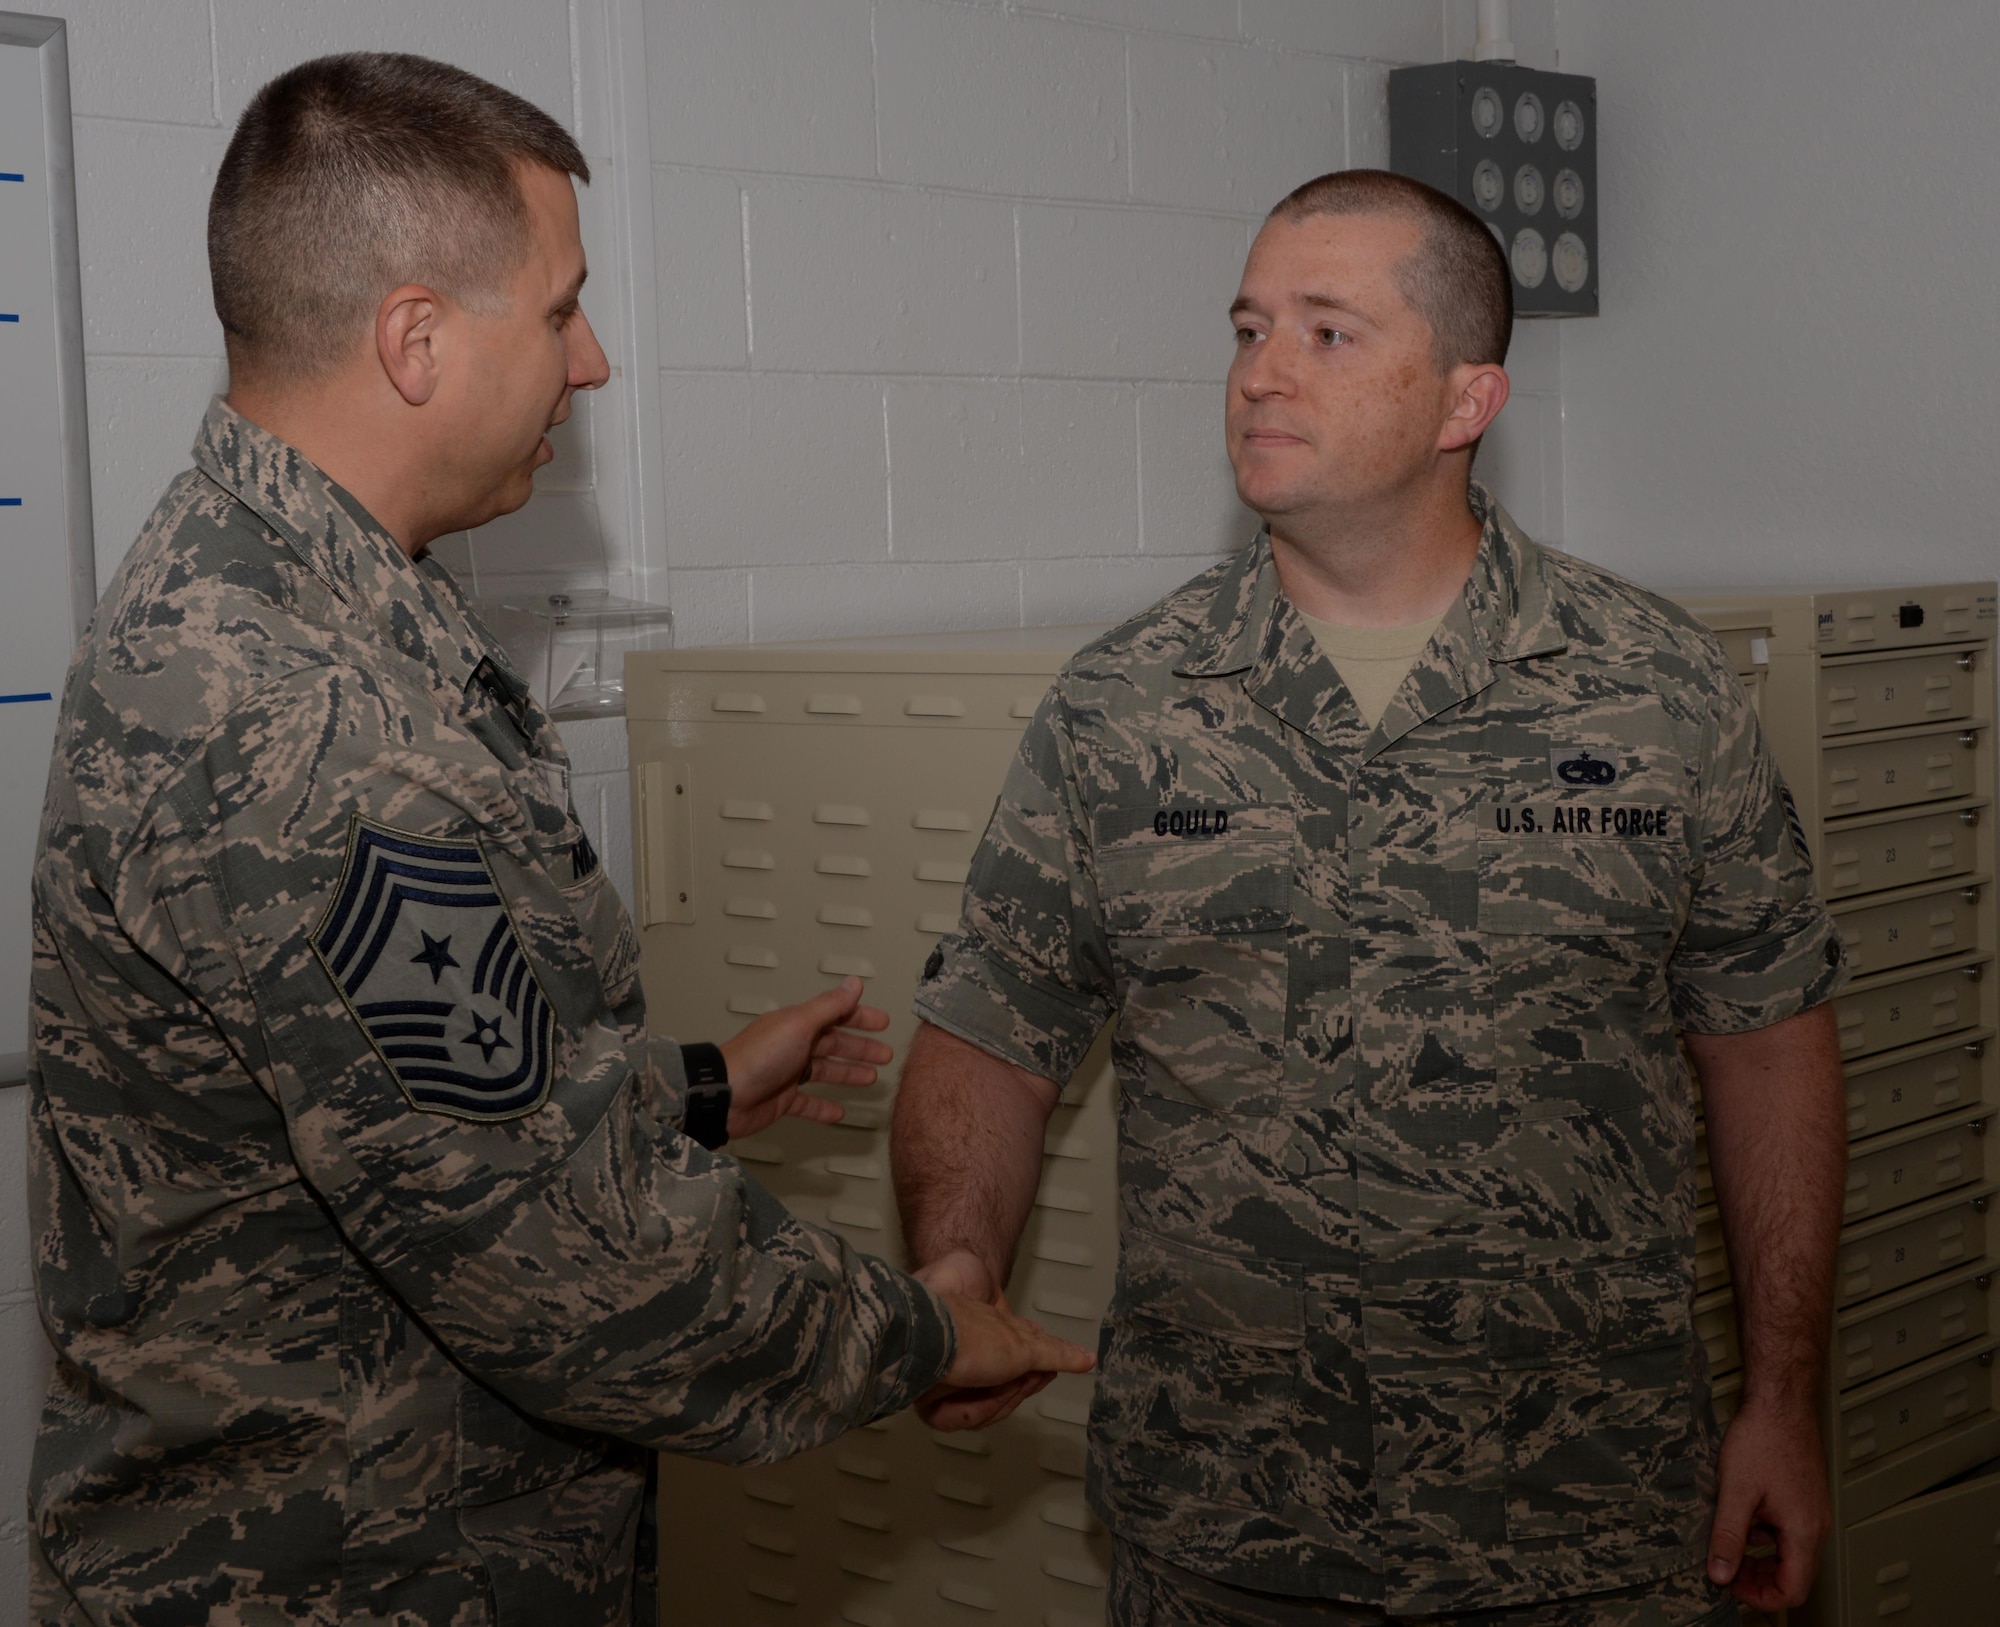 Chief Master Sgt. Steve Nichols (Left), 60th Air Mobility Wing command chief, presents his coin to Staff Sgt. Timothy Gould (Right), 60th Maintenance Squadron precision measurement equipment laboratory technician from Buffalo, New York, at Travis Air Force Base, Calif., Sept. 27, 2016. Gould was recognized for his efforts as a master resiliency training instructor. He has helped provide resiliency training to more than 800 Airmen in 2016. (U.S. Air Force photo/Tech. Sgt. James Hodgman)